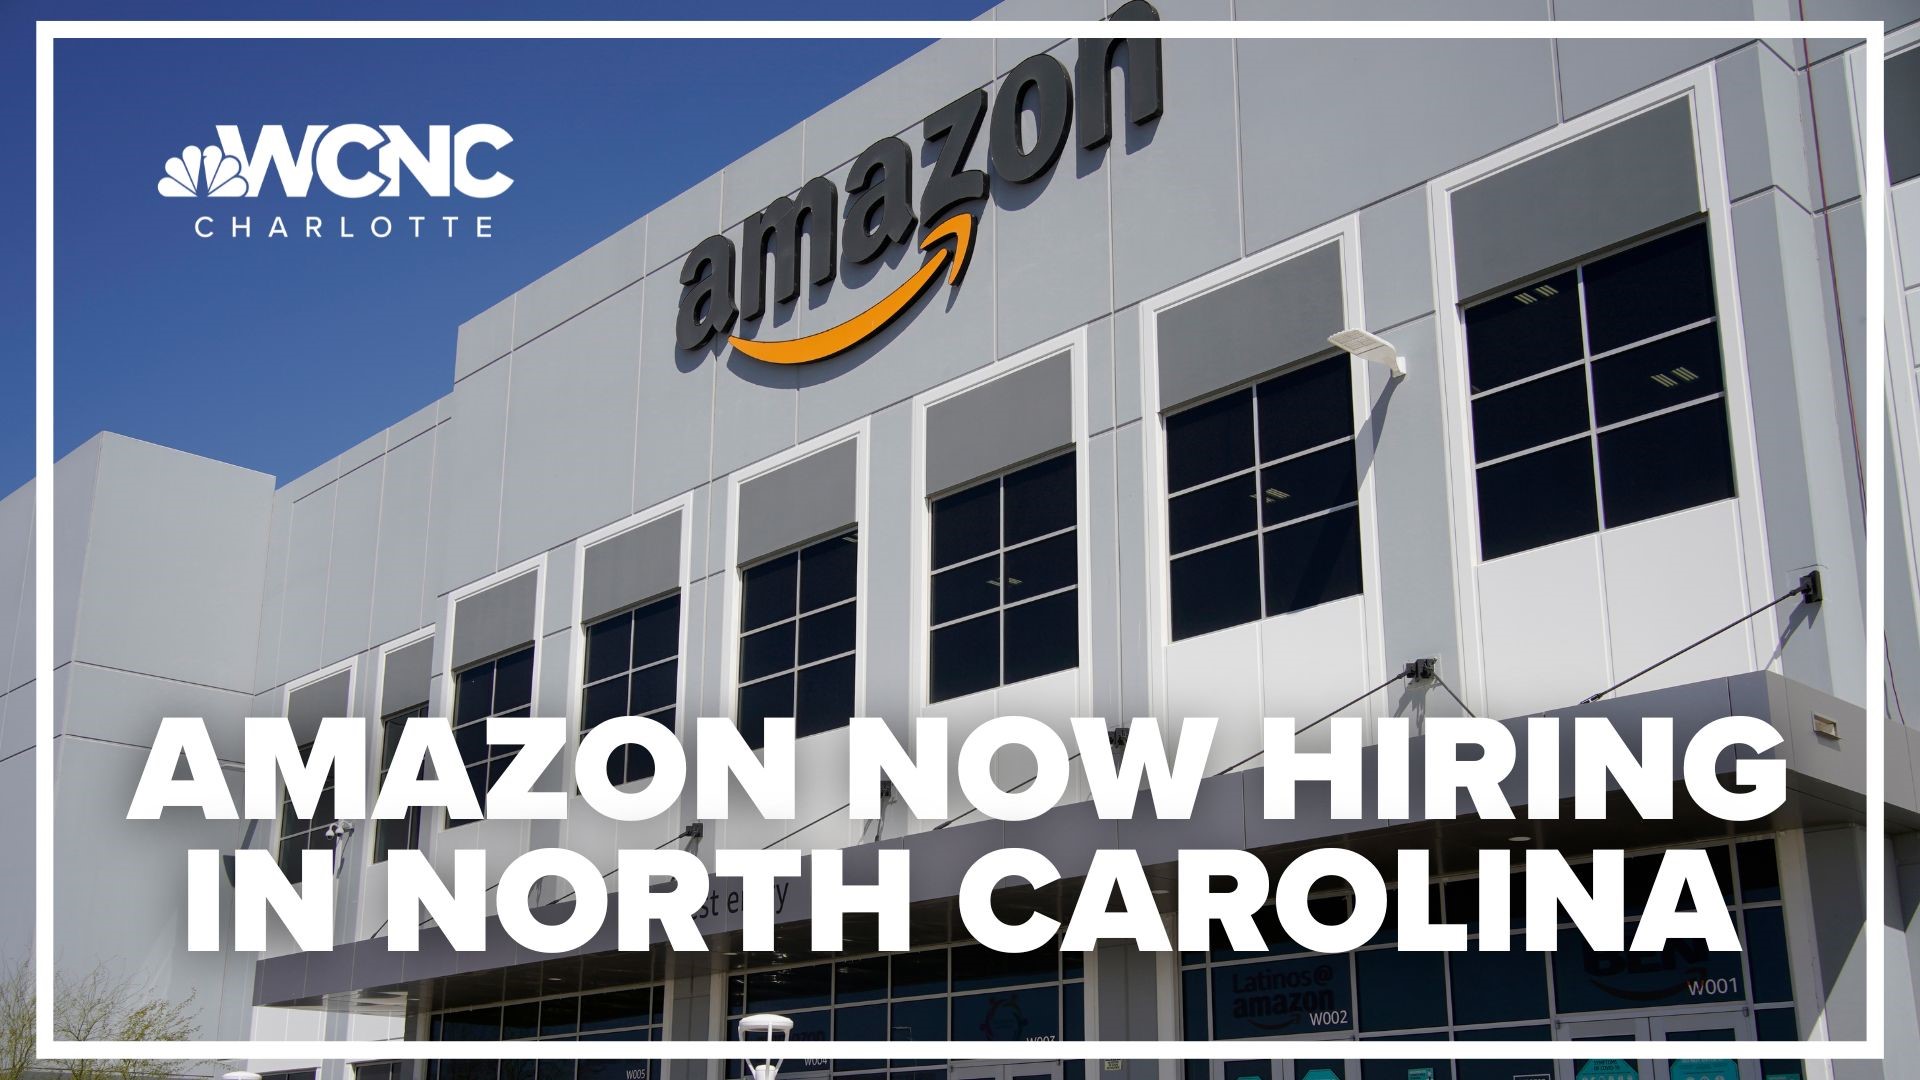 Amazon says it will offer an average pay of $19 an hour and sign-on bonuses up to $1,000 for full-time, part-time and seasonal openings in North Carolina.